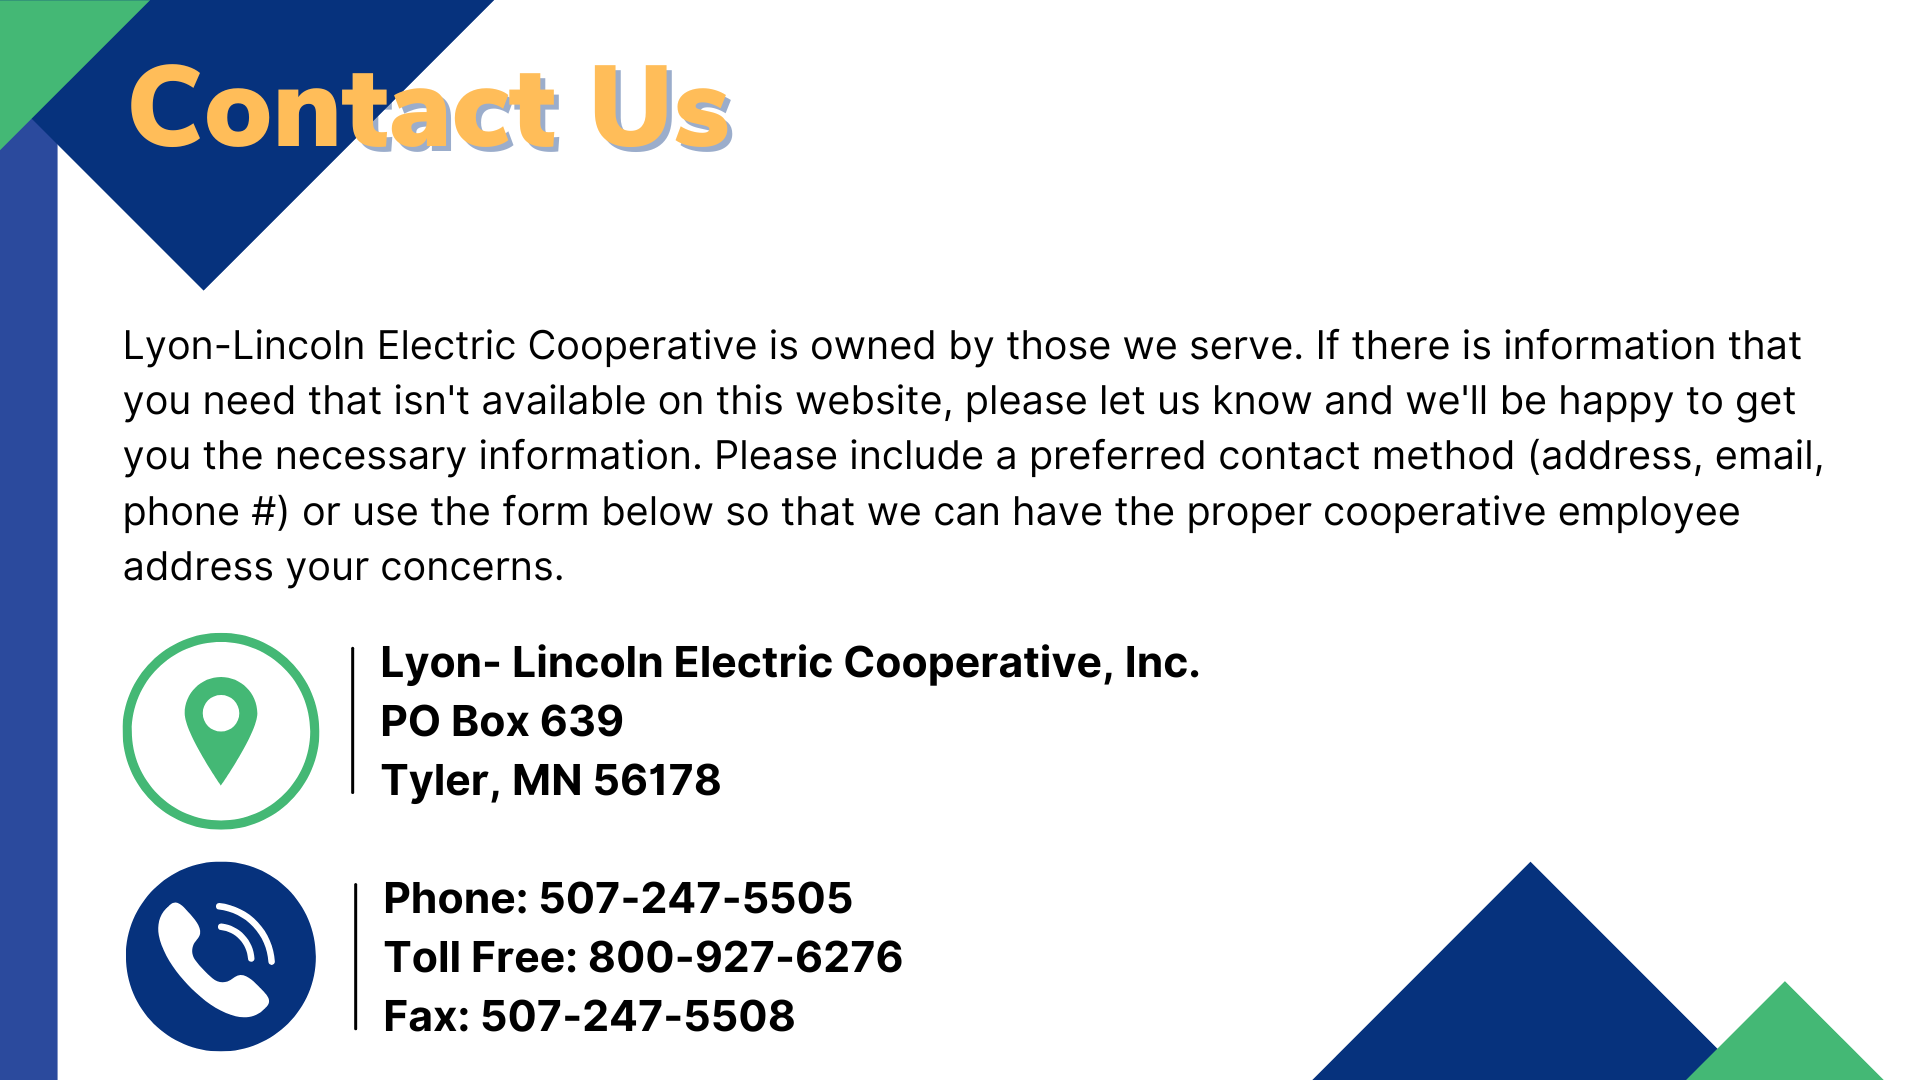 contact-us-lyon-lincoln-electric-cooperative-inc